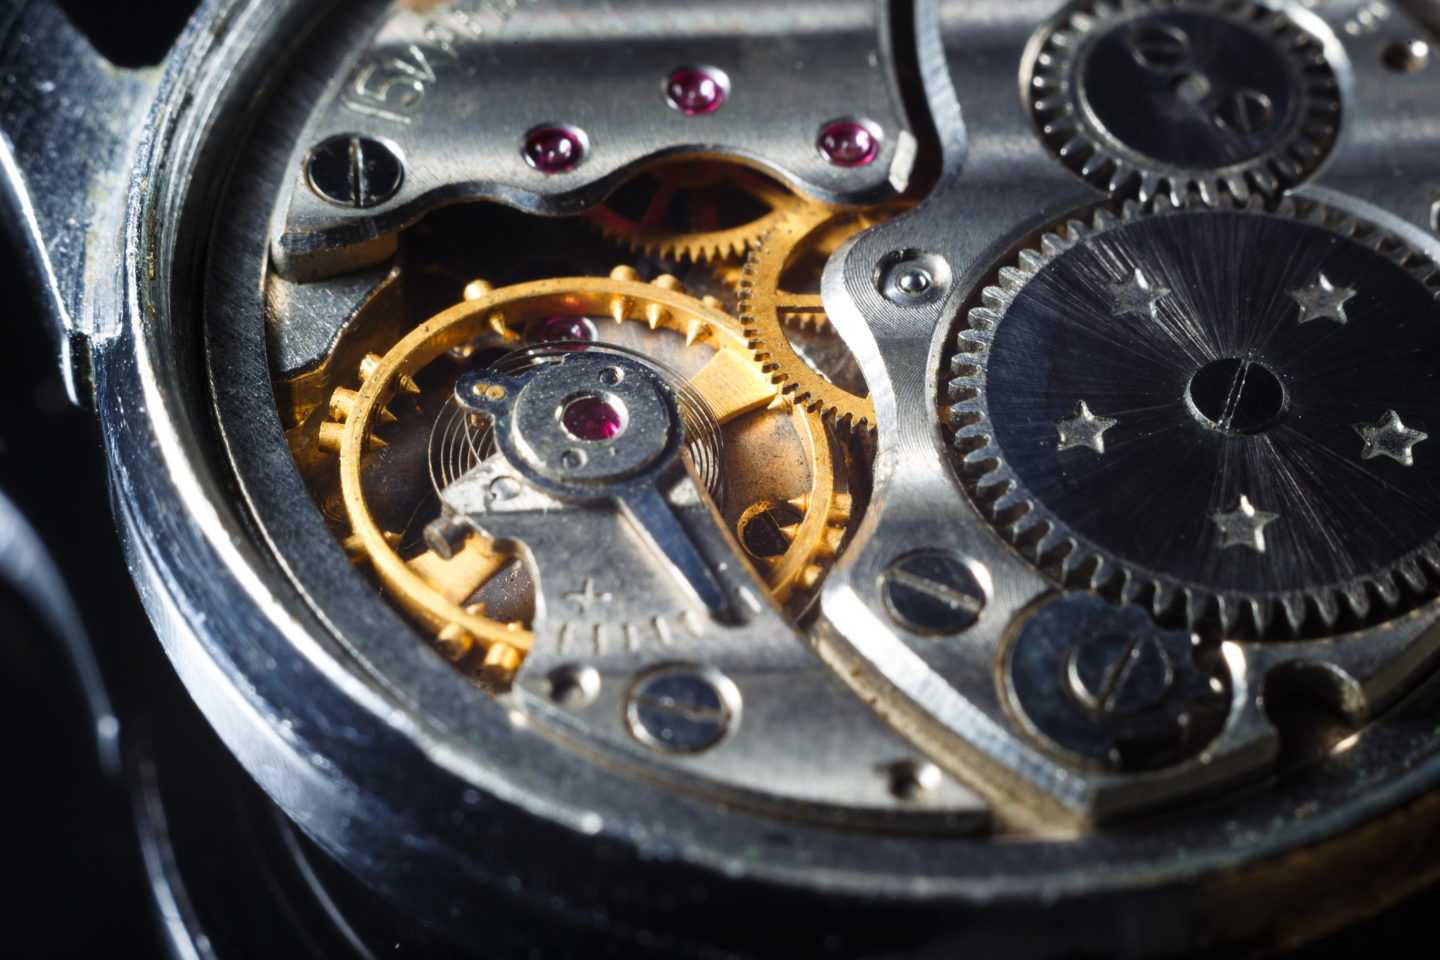 The Swiss Luxury Watchmaking Industry A general overview  - HEC